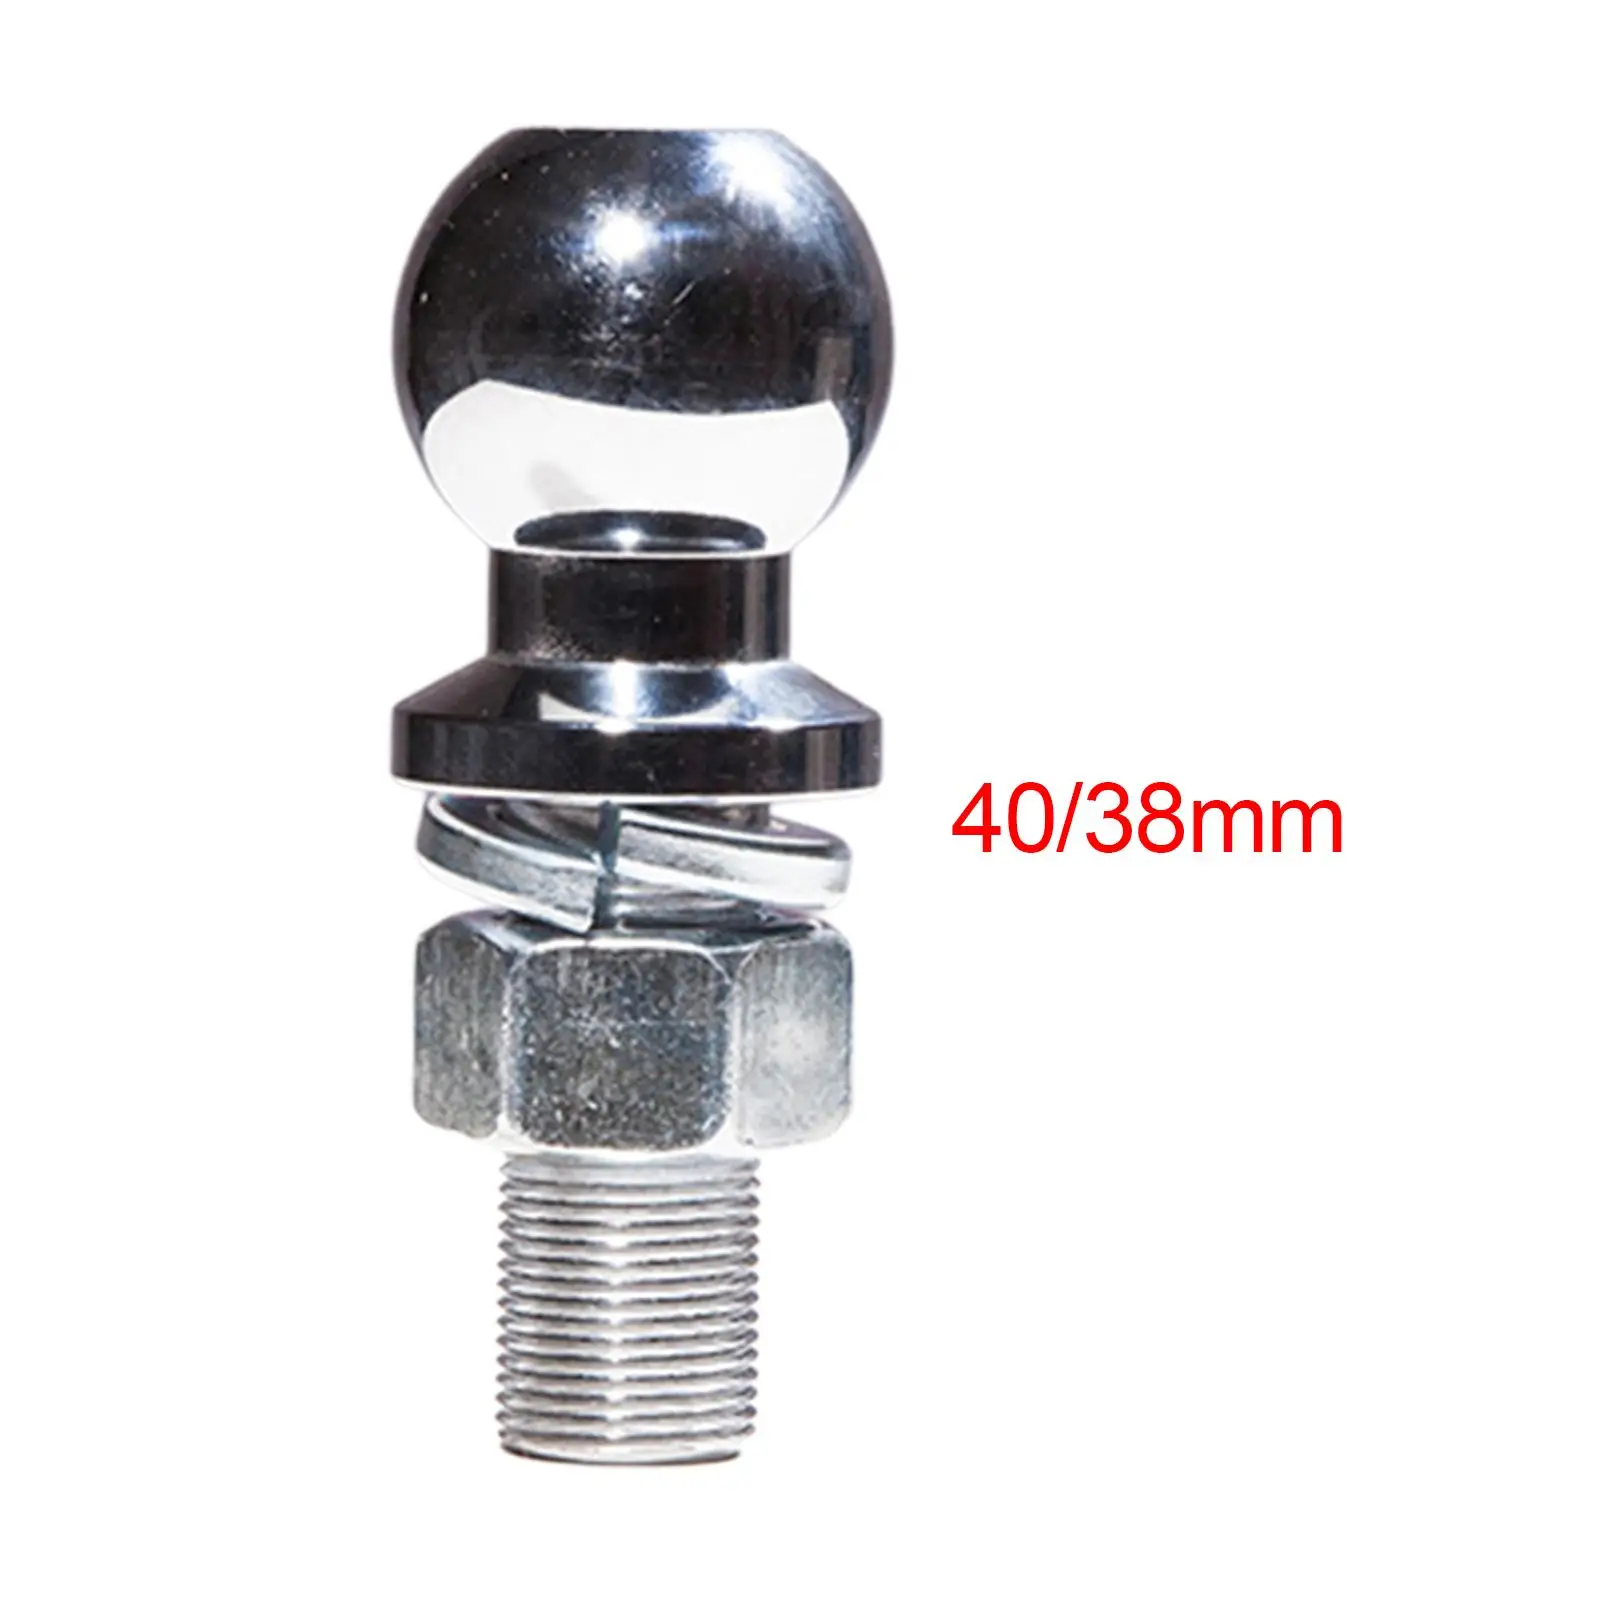 Trailer Connector Ball Head 2 inch Easy to Install Parts for Yacht